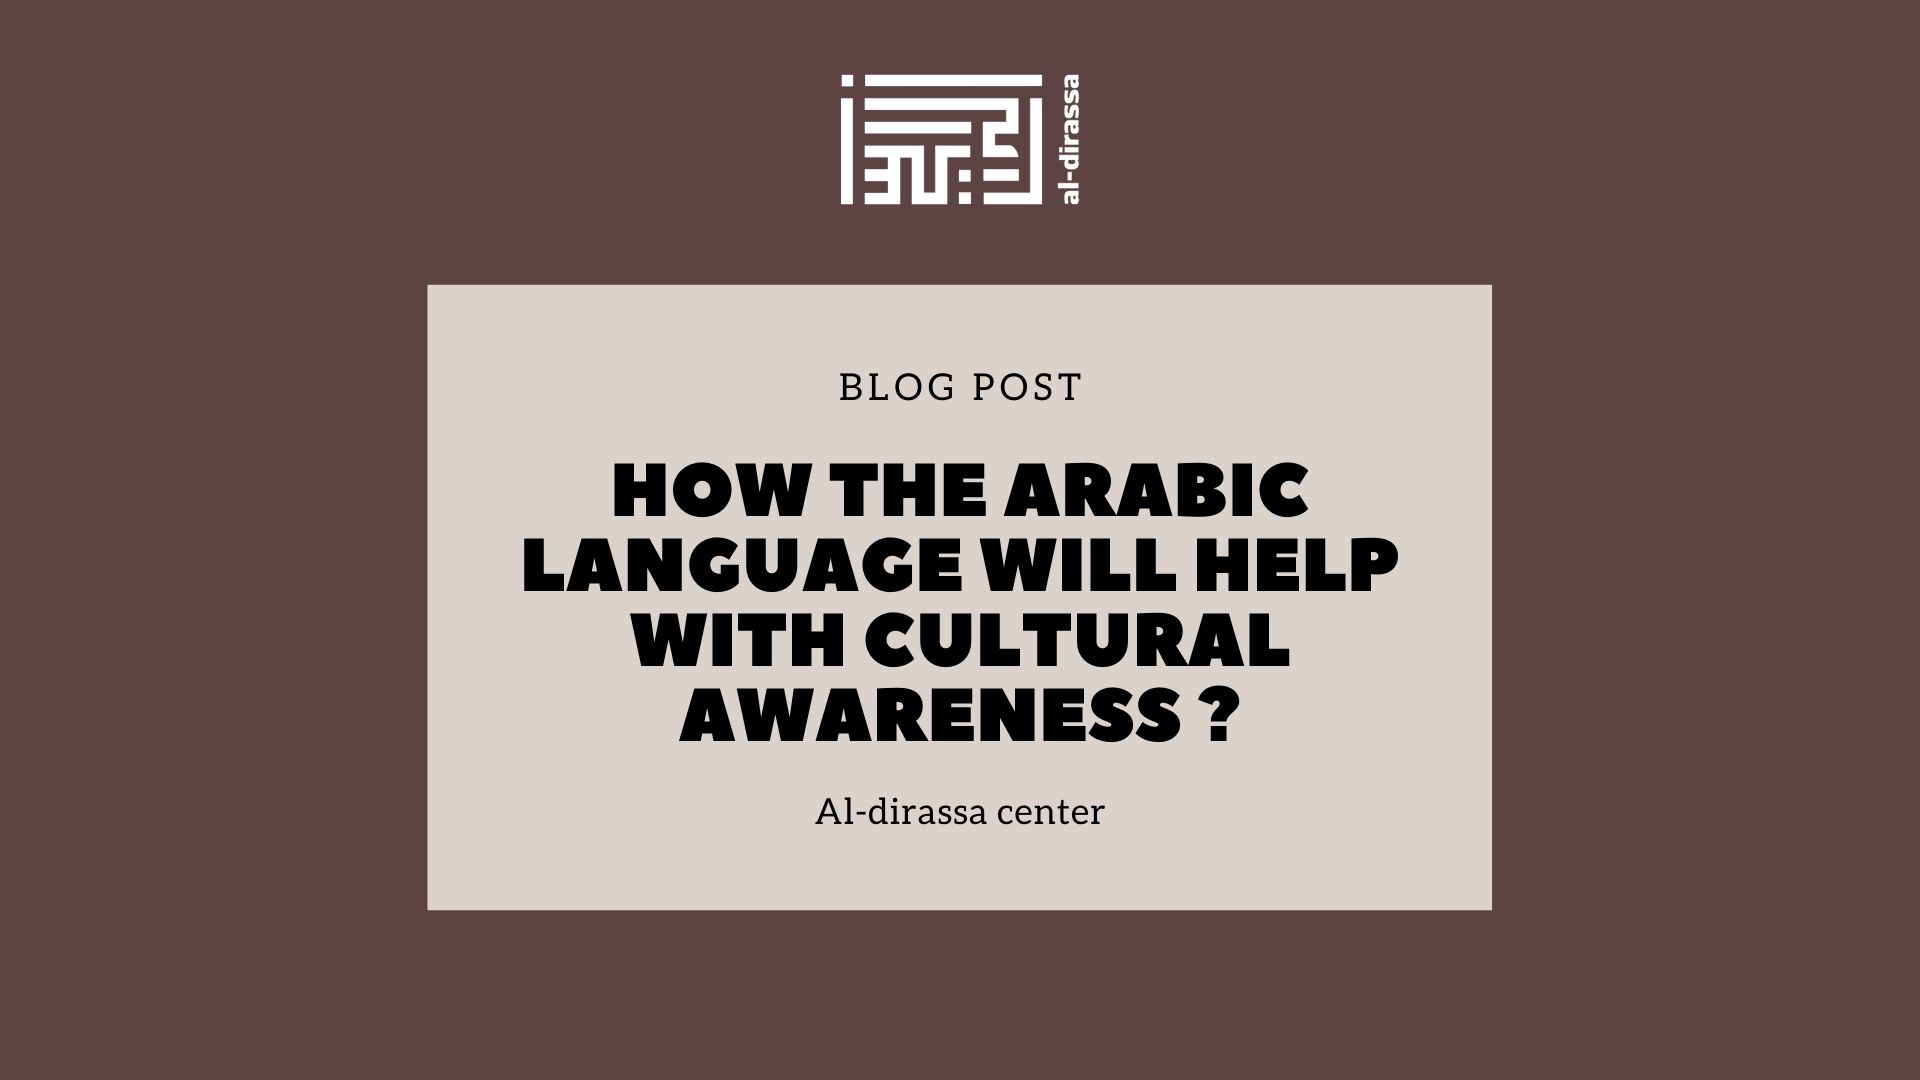 How the Arabic Language will help with cultural awareness